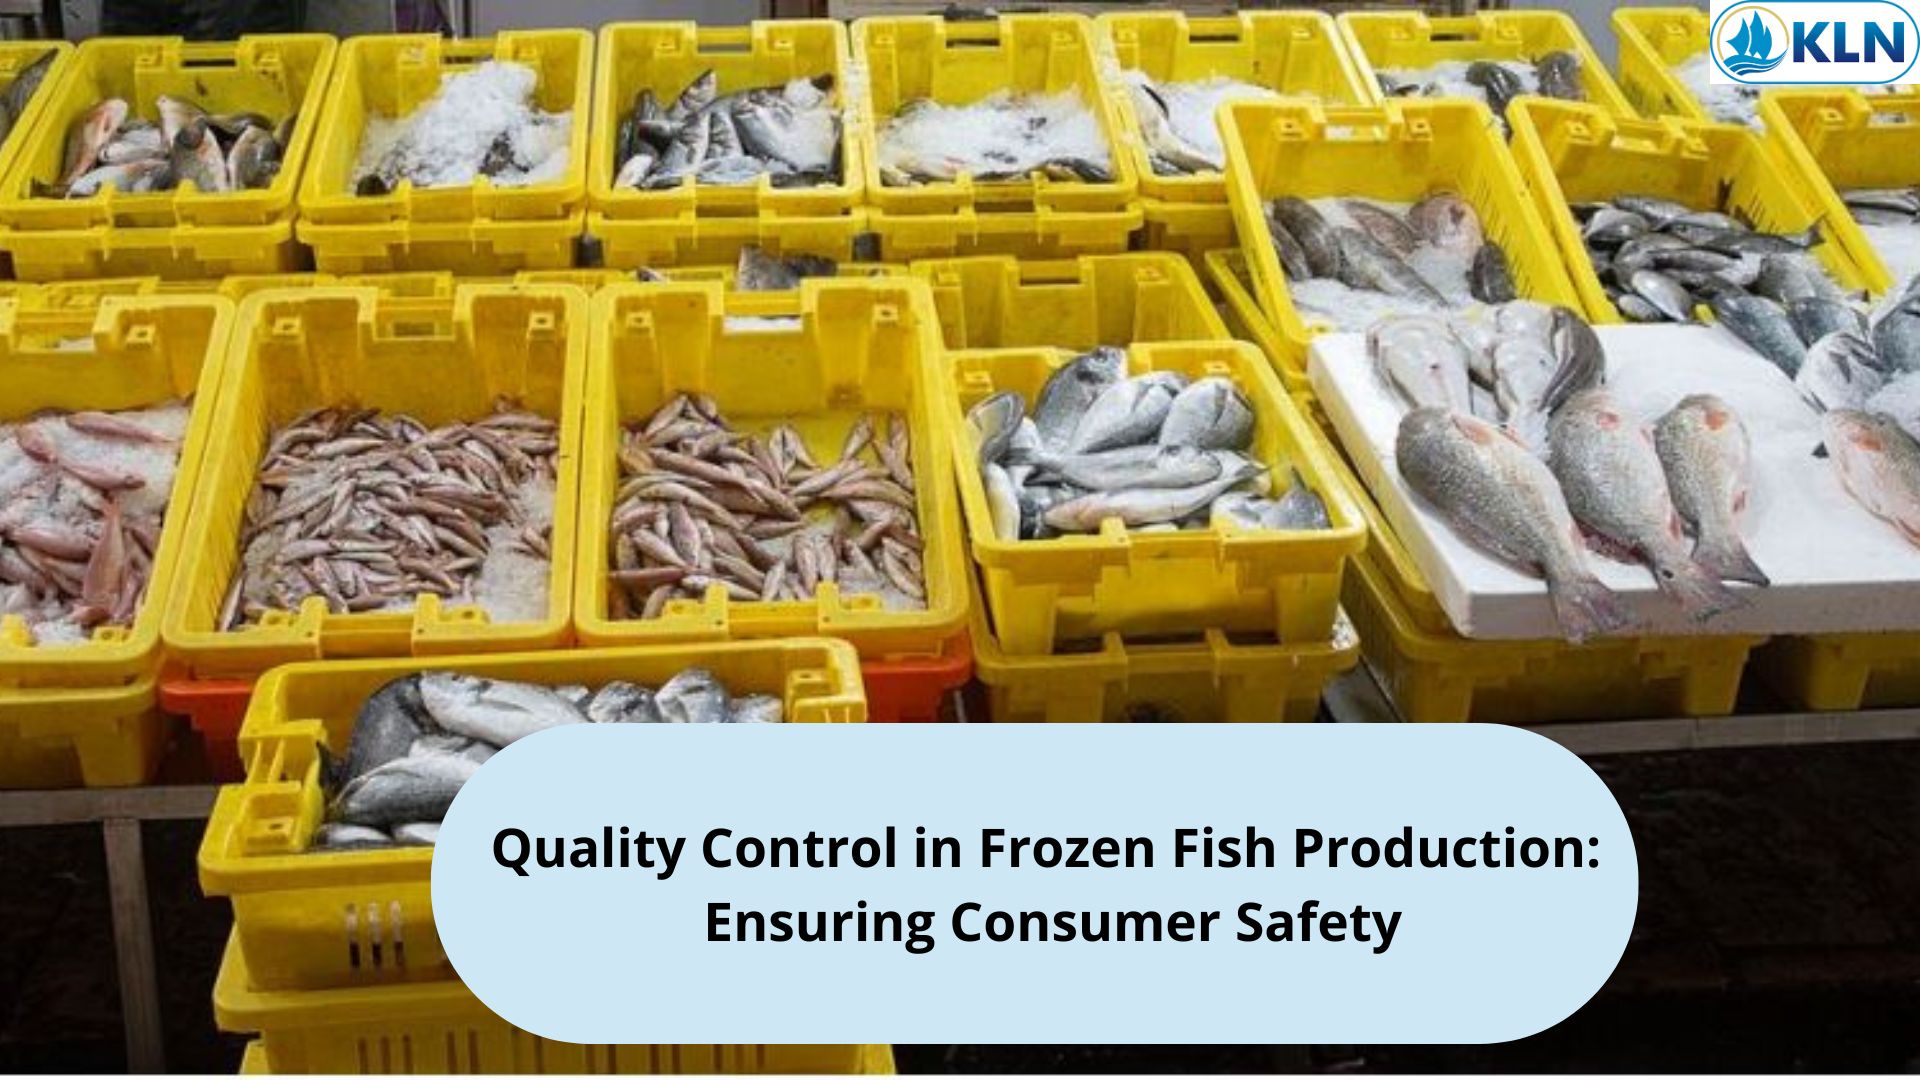 Quality Control in Frozen Fish Production: Ensuring Consumer Safety